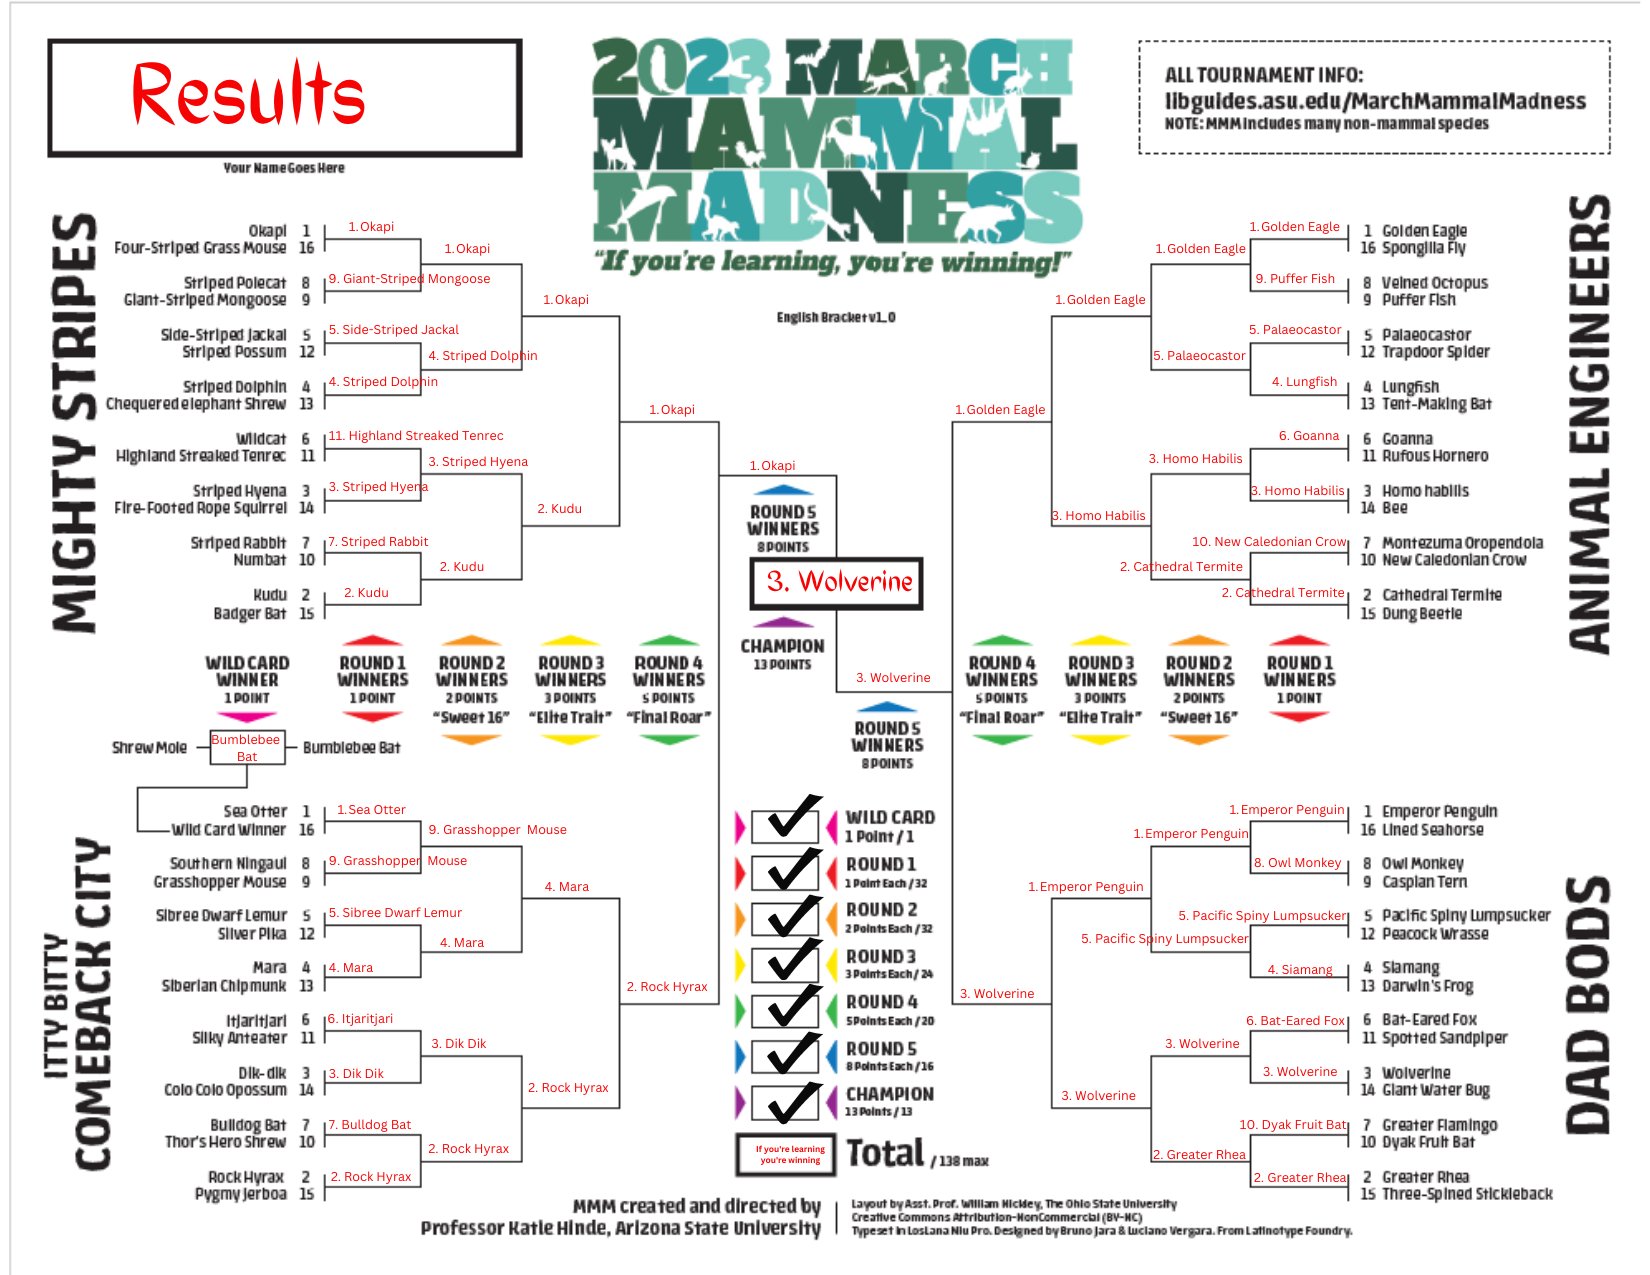 March Mammal Madness on Twitter "THE WINNER OF THE 2023MMM